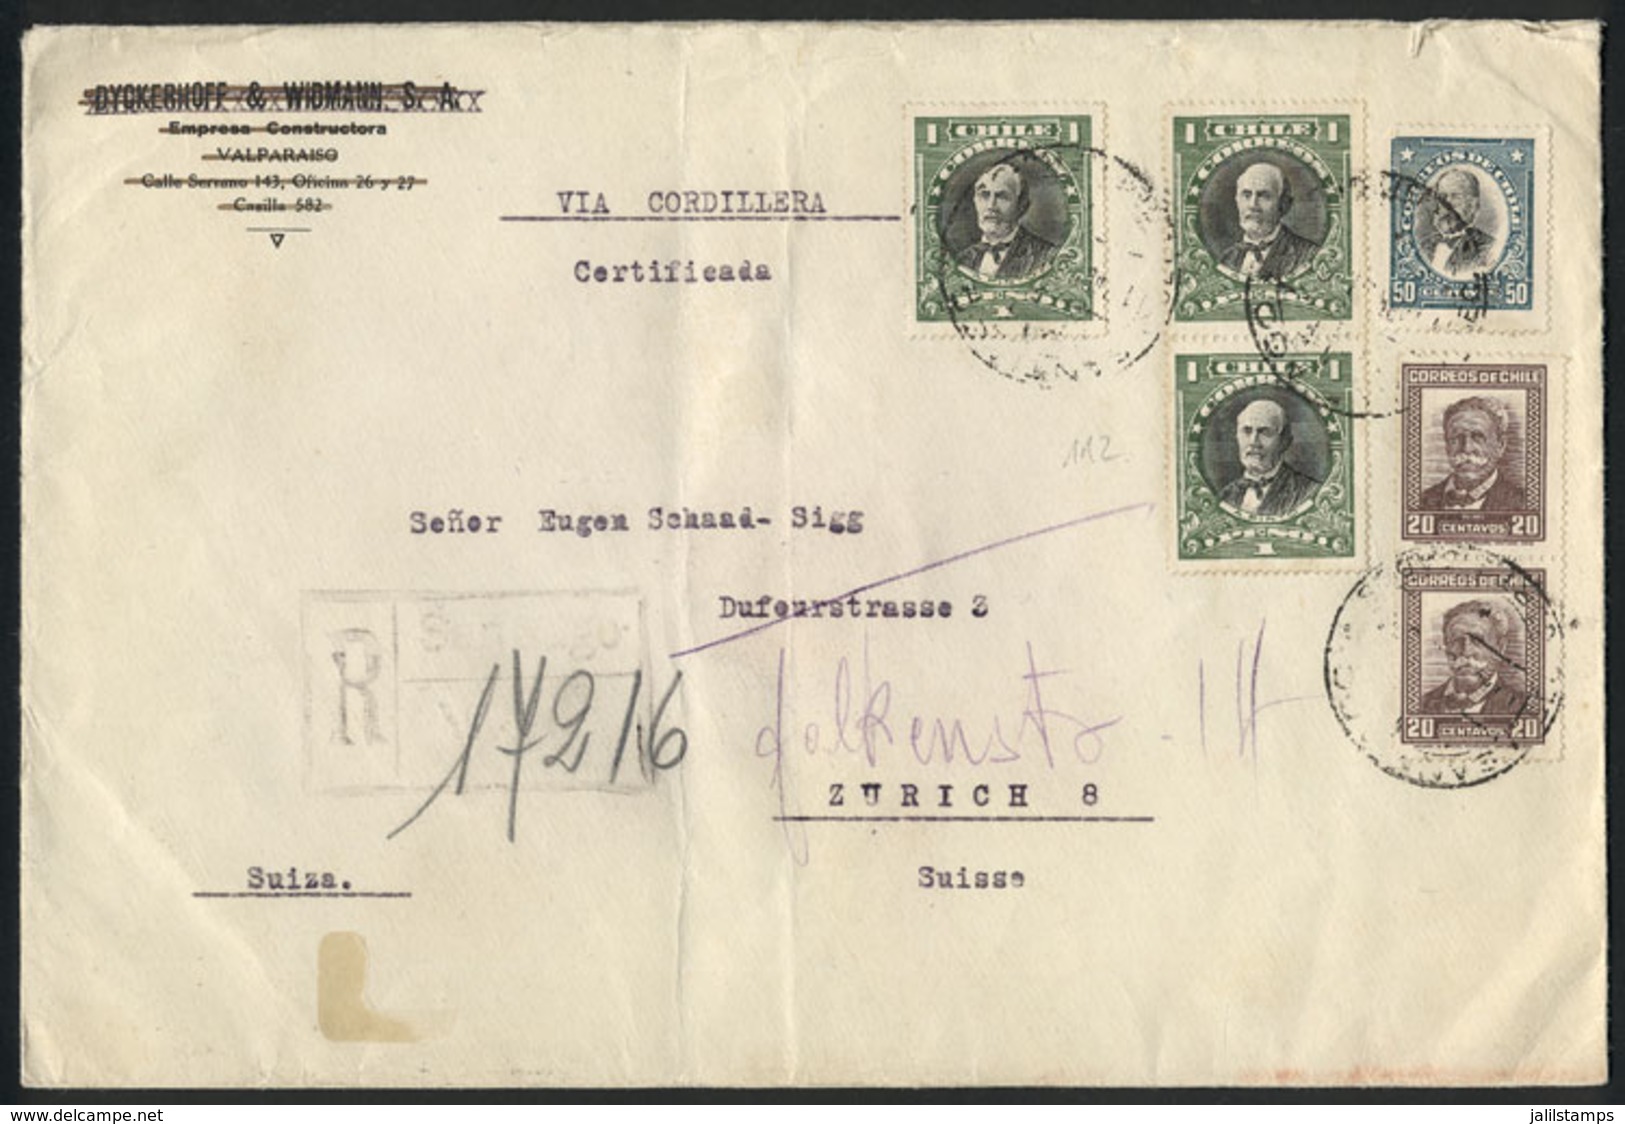 482 CHILE: 4 Covers Sent To Switzerland Between 1929 And 1948, Nice High Postages, Very Fine Quality, Market Value US$50 - Chile